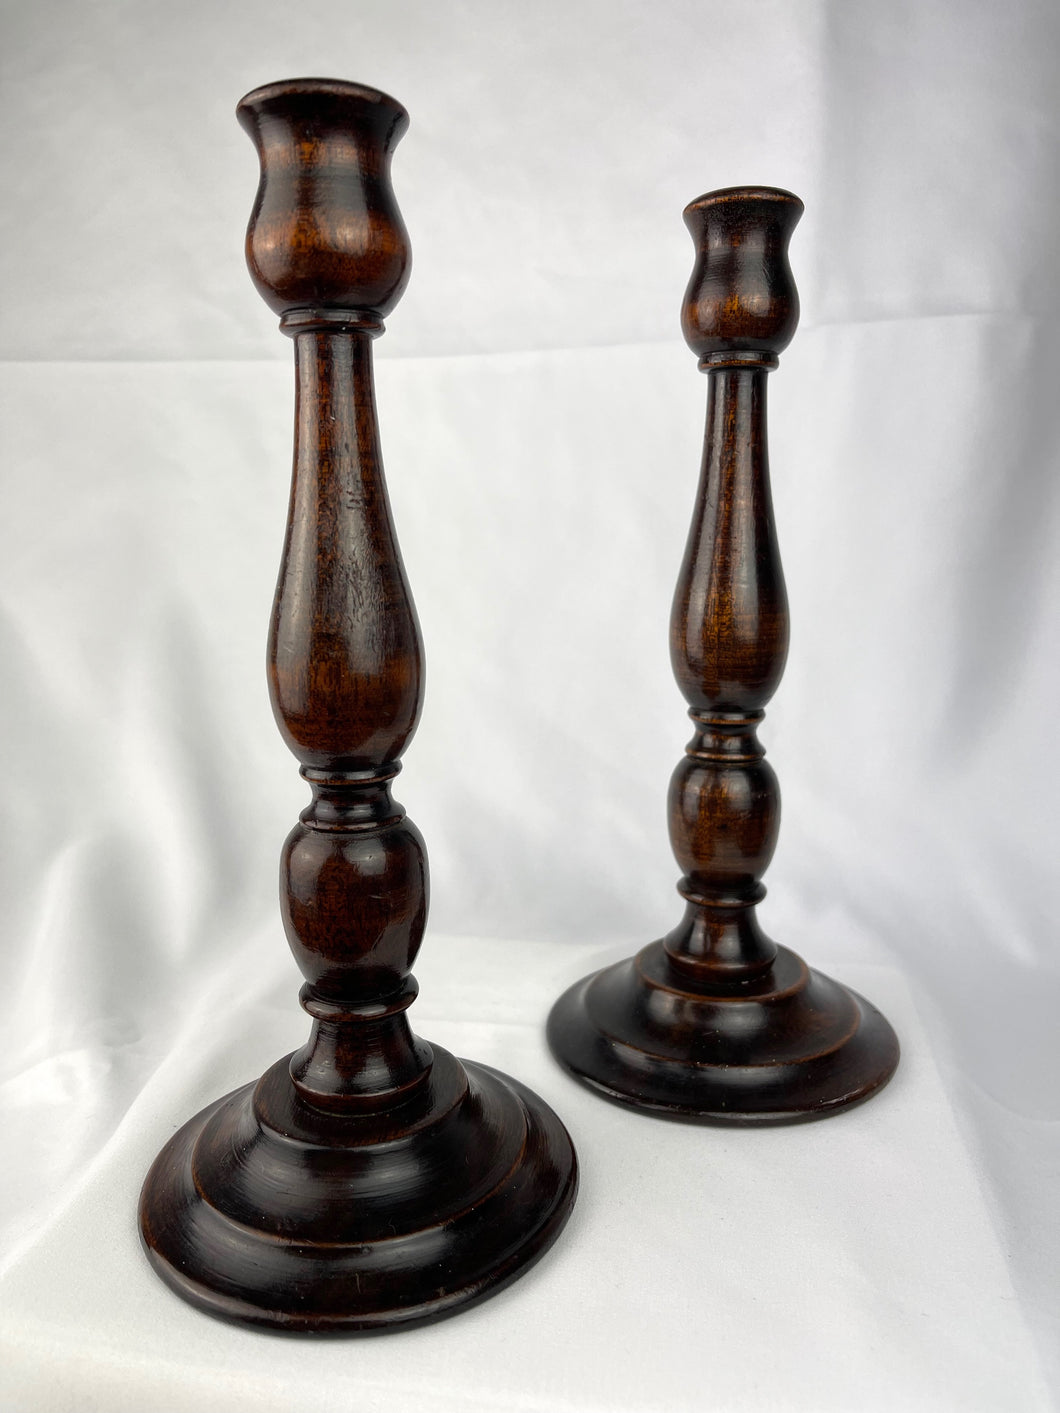 Antique Pair of Turned Oak Candlesticks